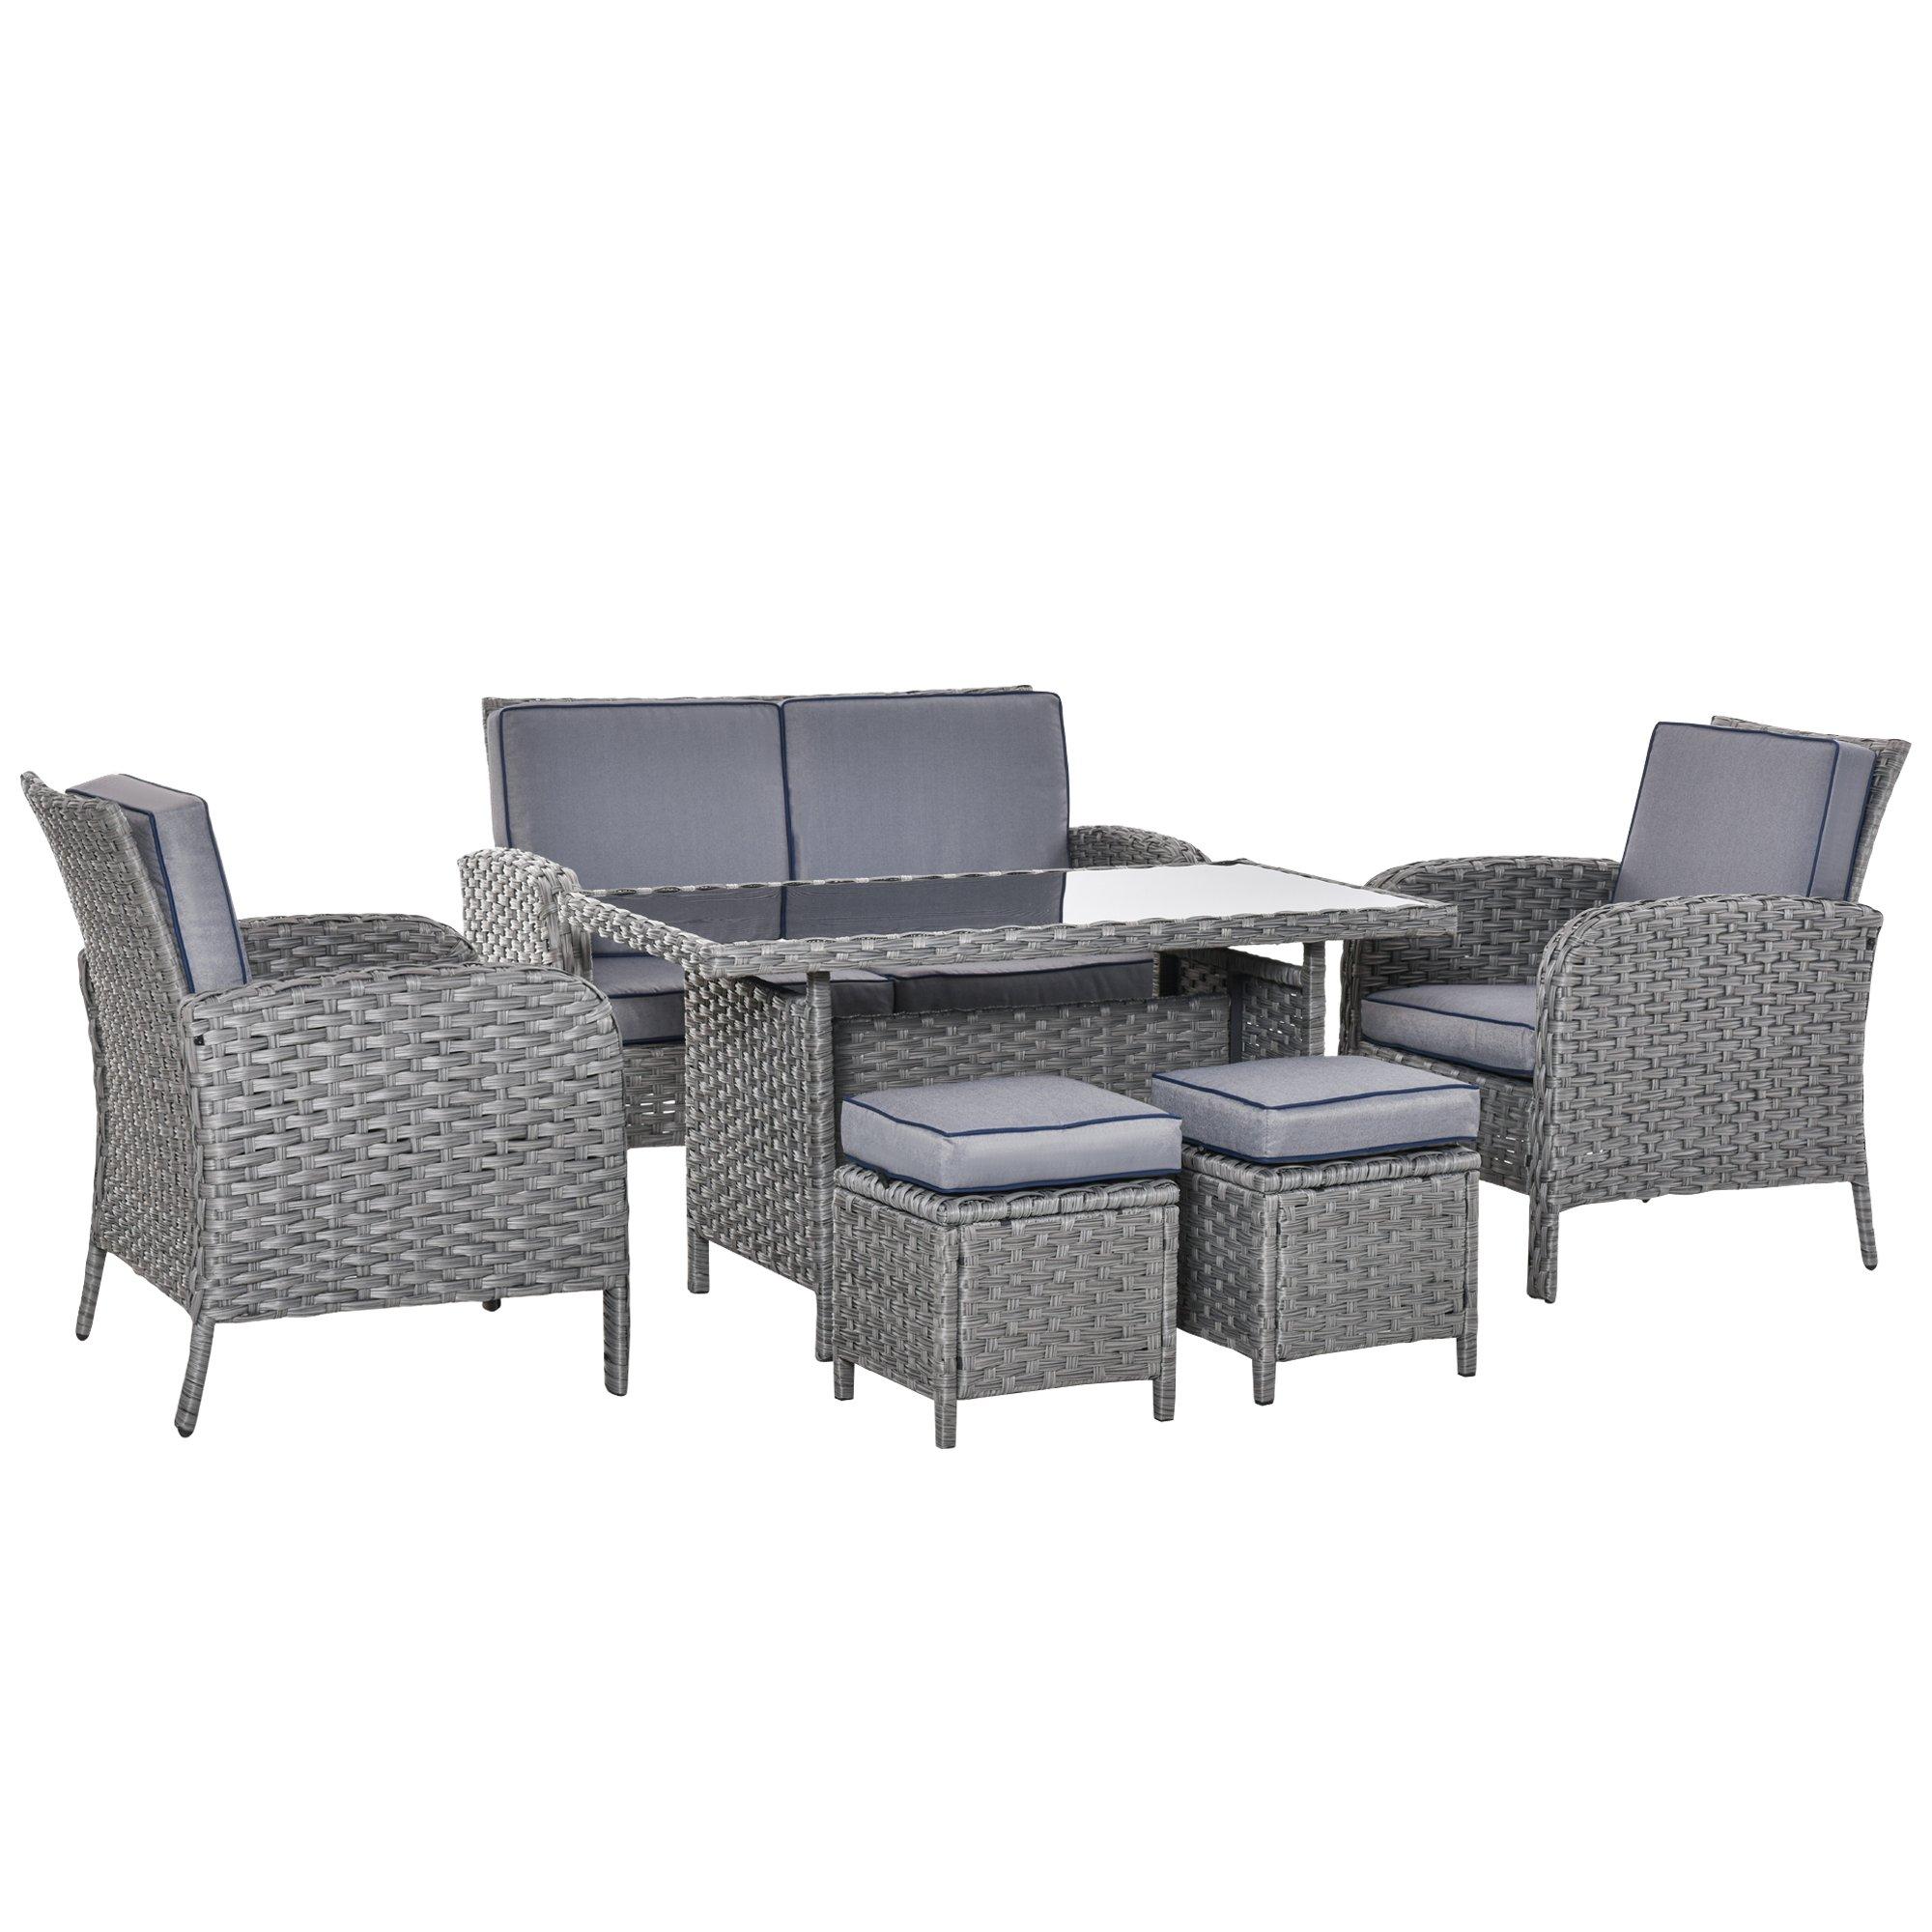 6 PCS Outdoor All Weather PE Rattan Dining Table Sofa Furniture Sets w/ Cushions